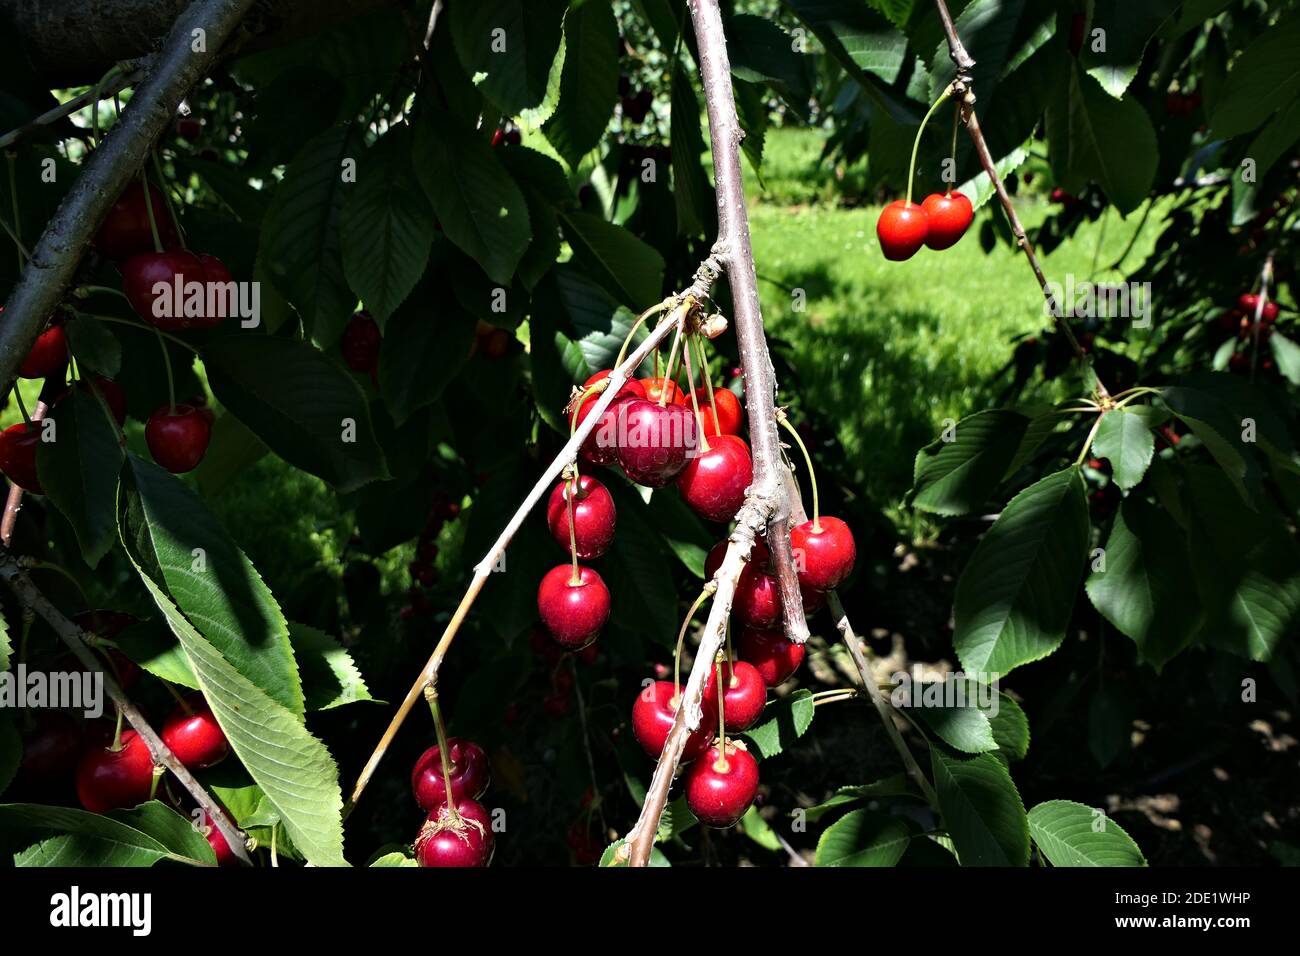 Cherry tree branch with a bunch of ripe and healthy red cherries and leaves Stock Photo